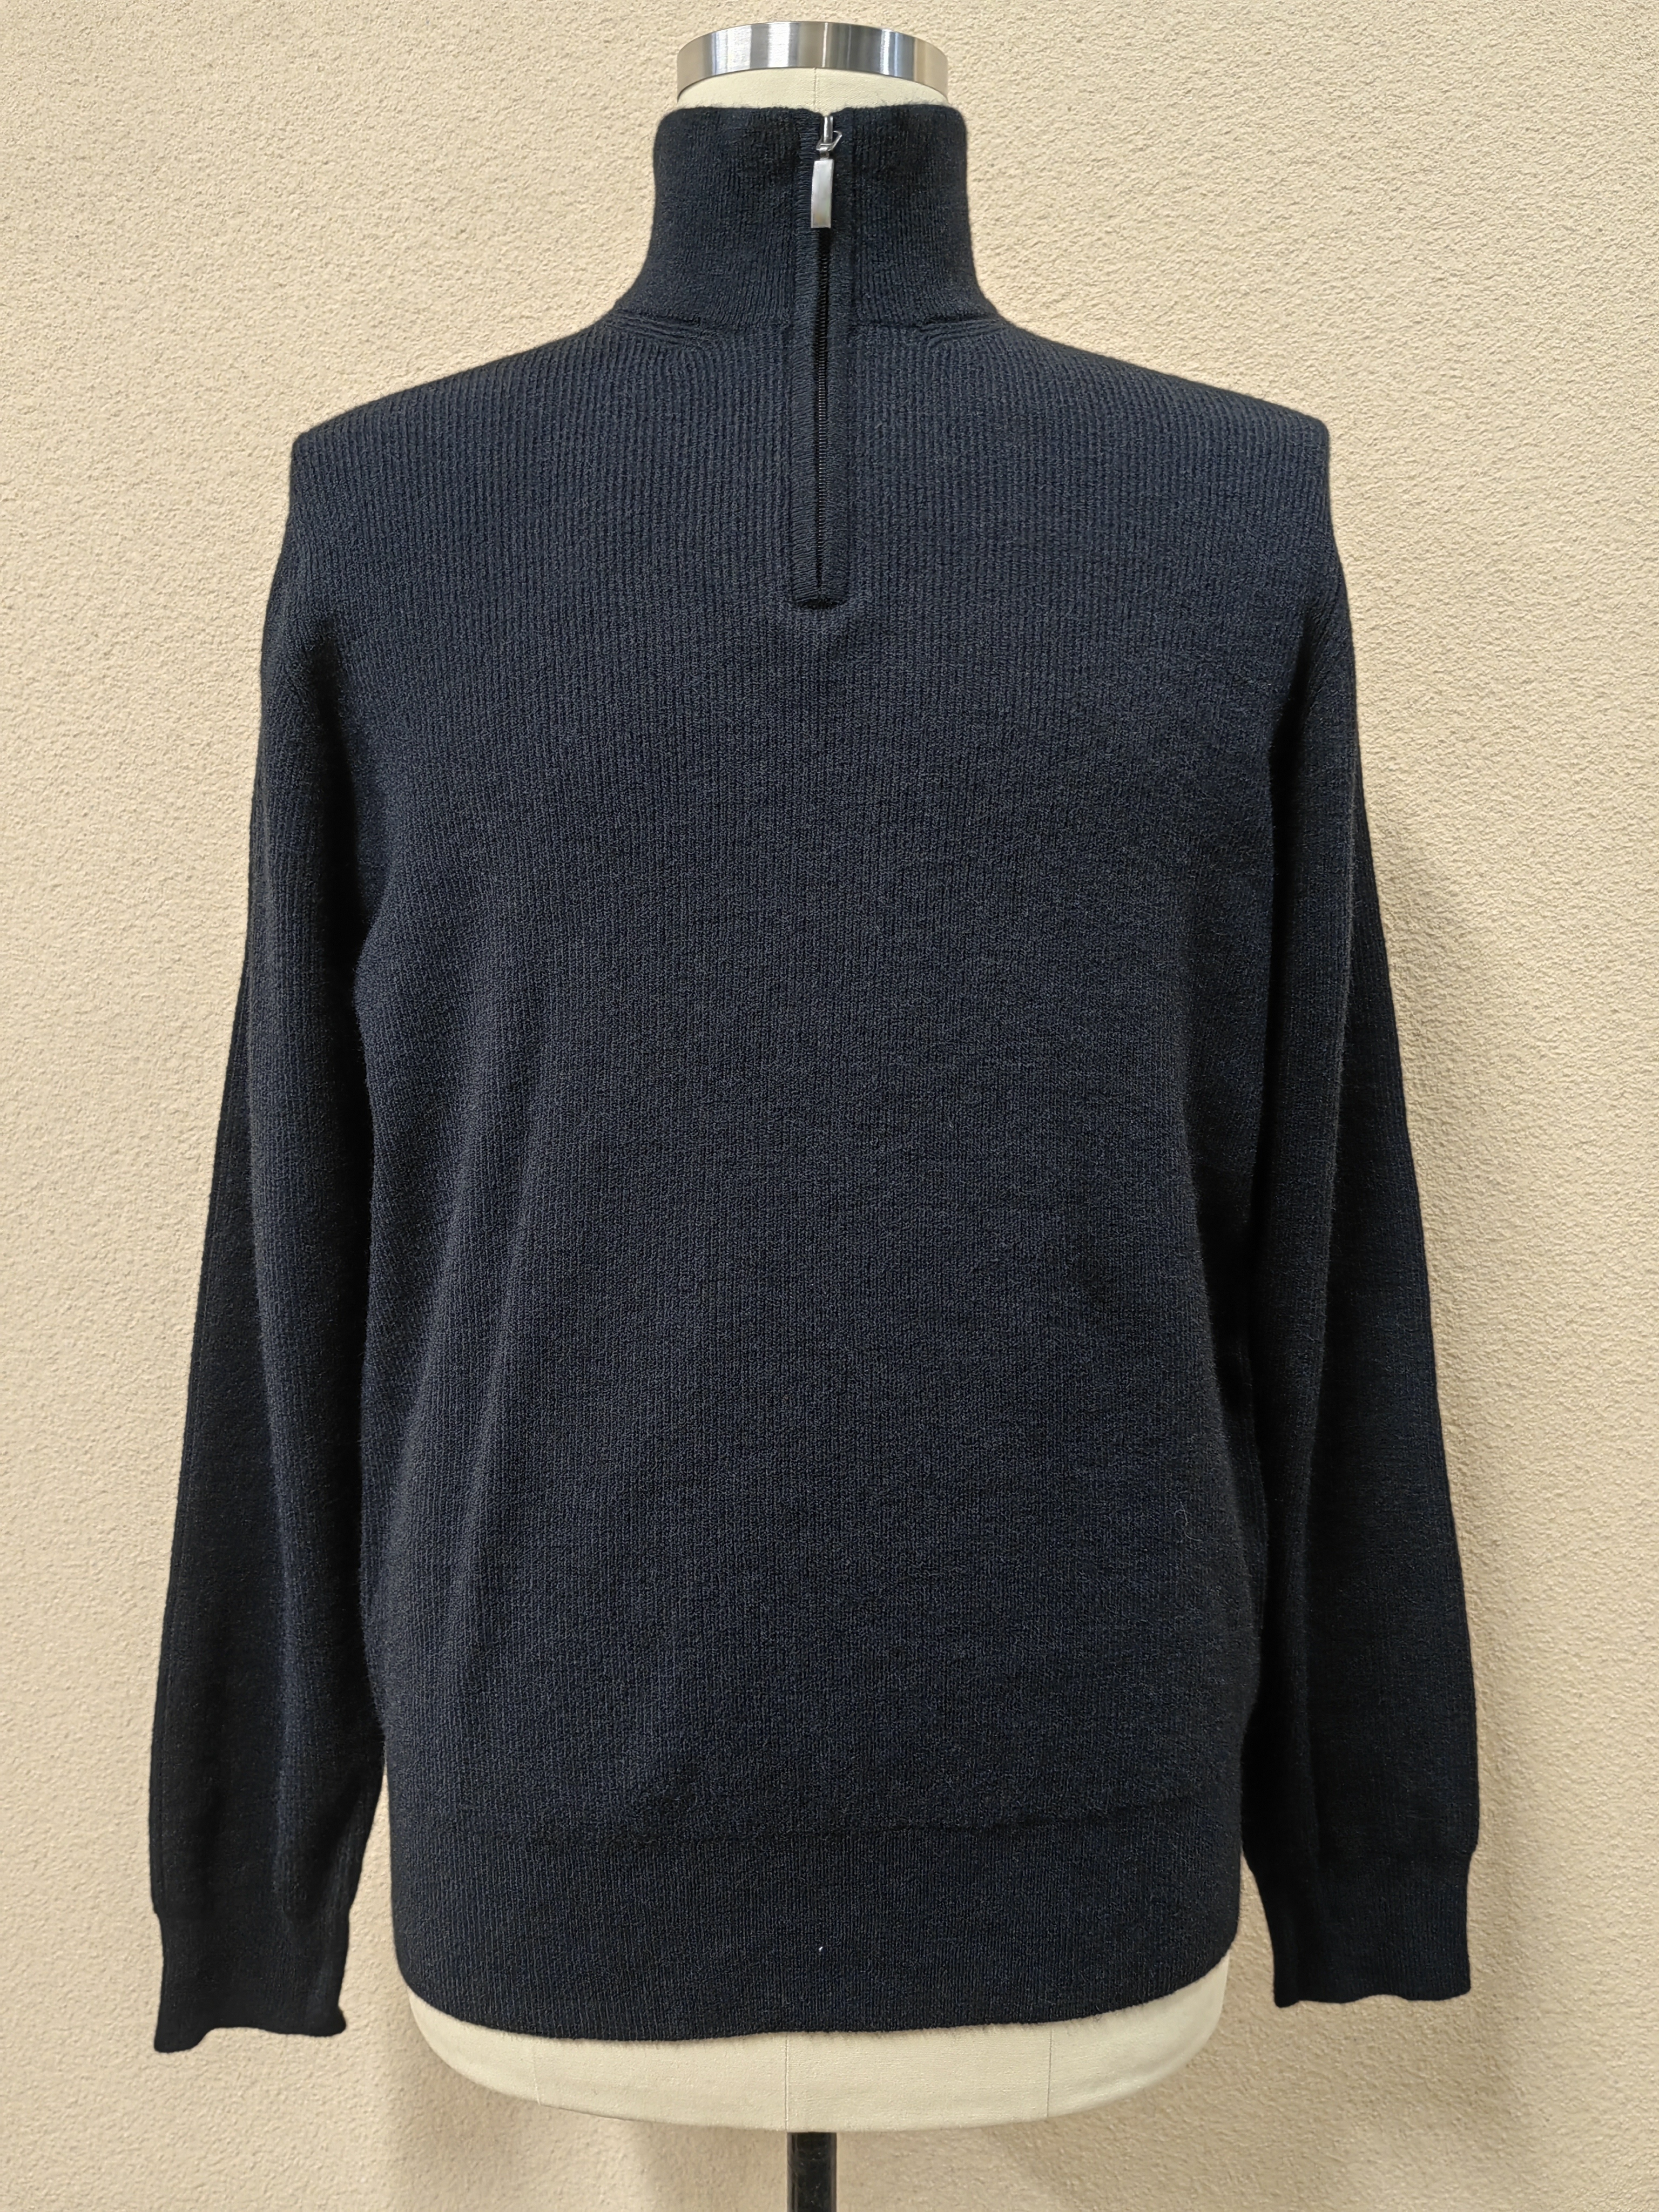 Chinse Supplier Black Knitted Wool Plain Long Sleeve Men's Turtleneck Pullovers Sweater 